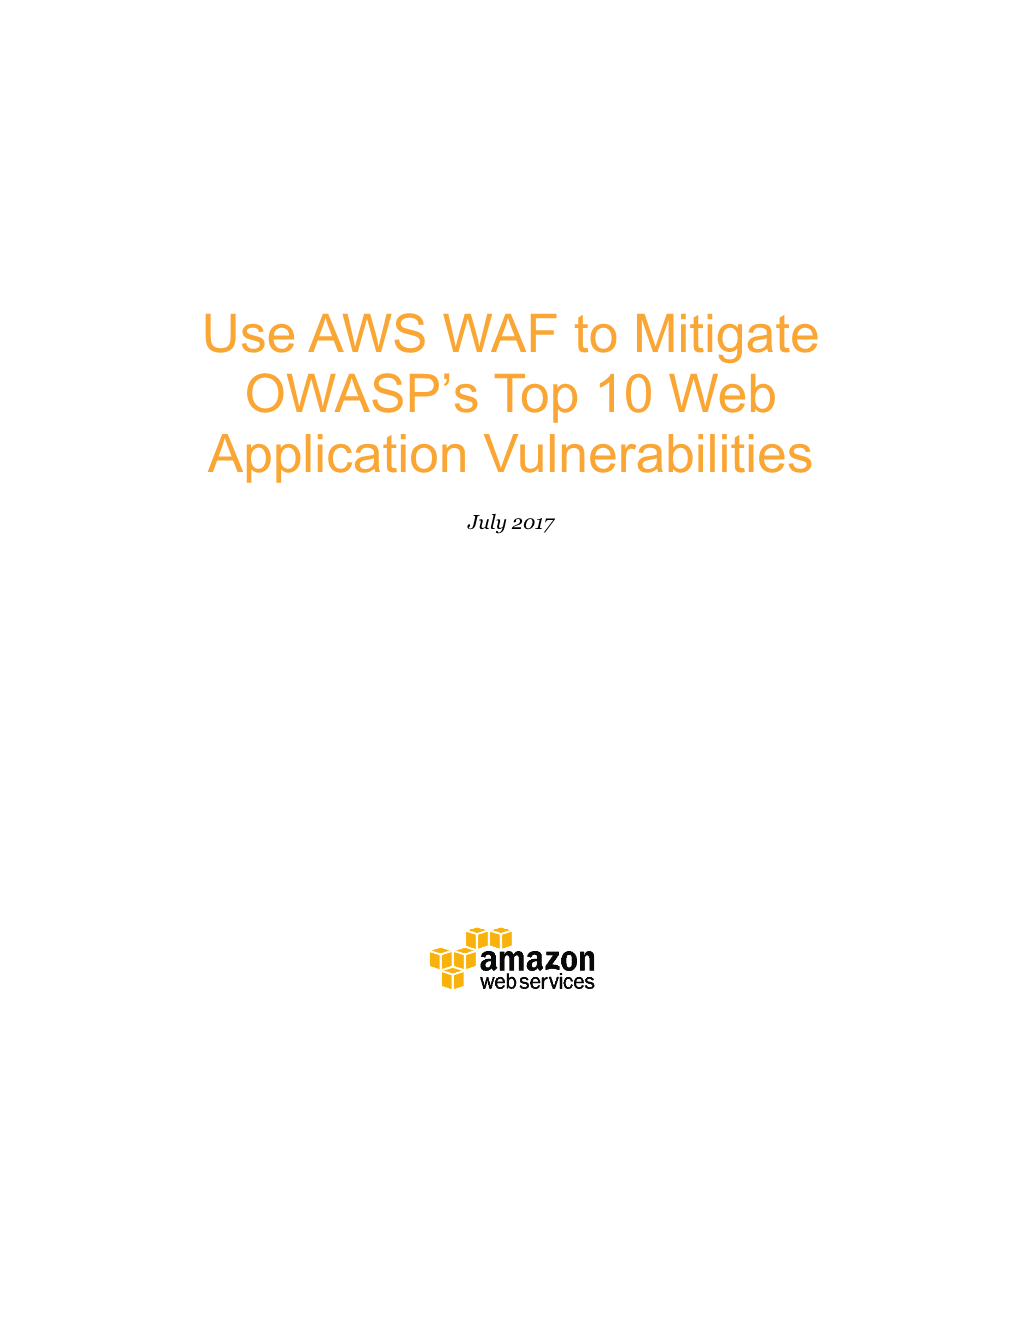 Use AWS WAF to Mitigate OWASP's Top 10 Web Application